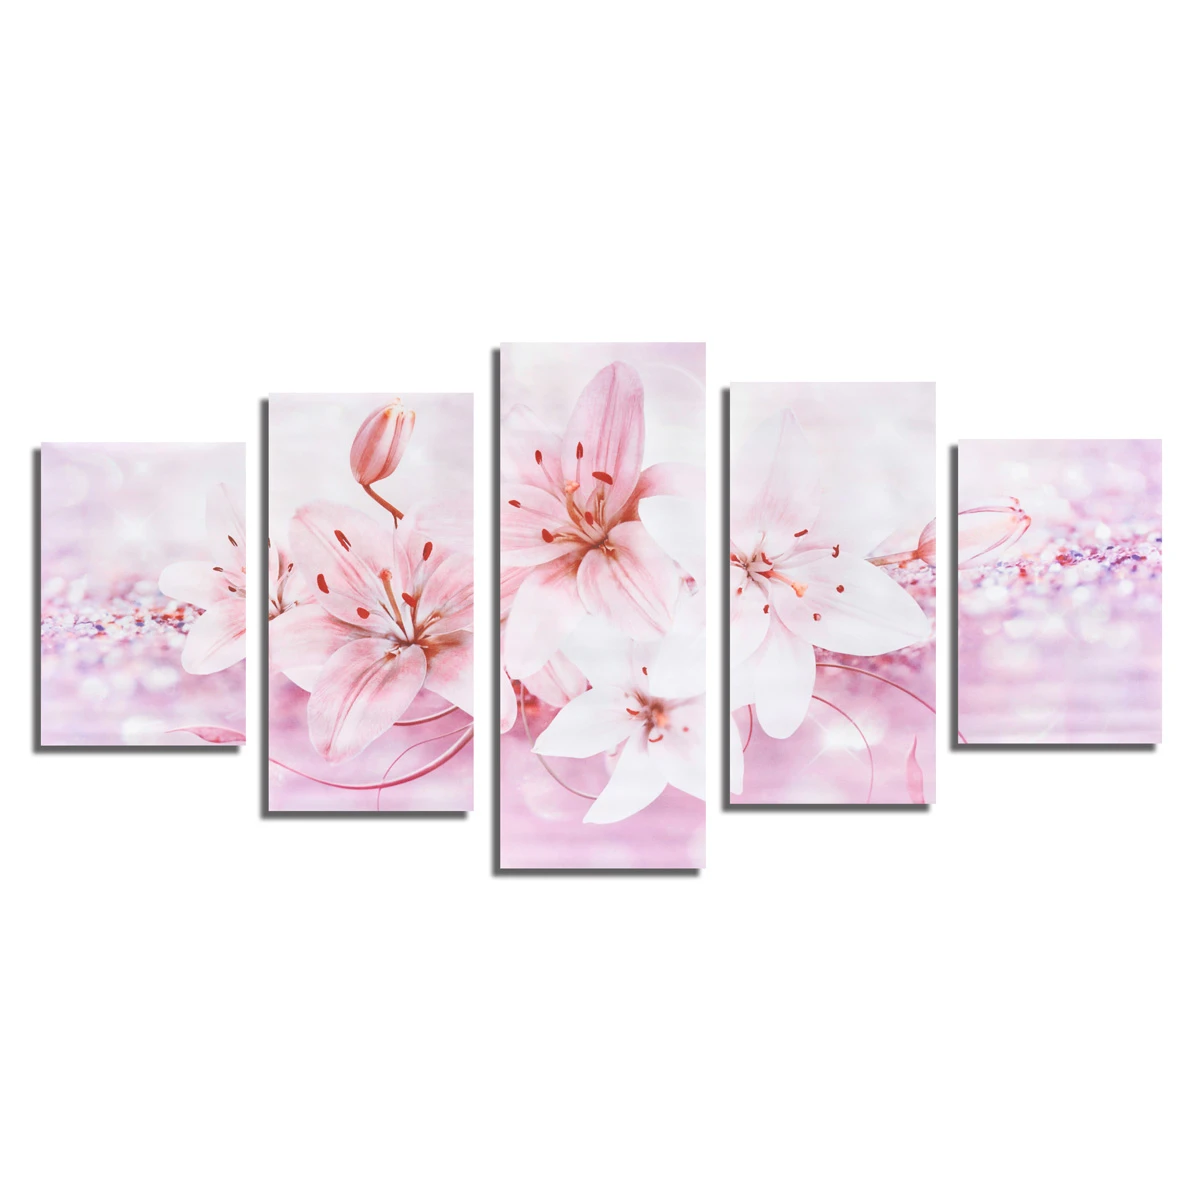 5PCS Lilies Frameless Modern Canvas Painting Mural Wall Picture Paintings Home Decoration